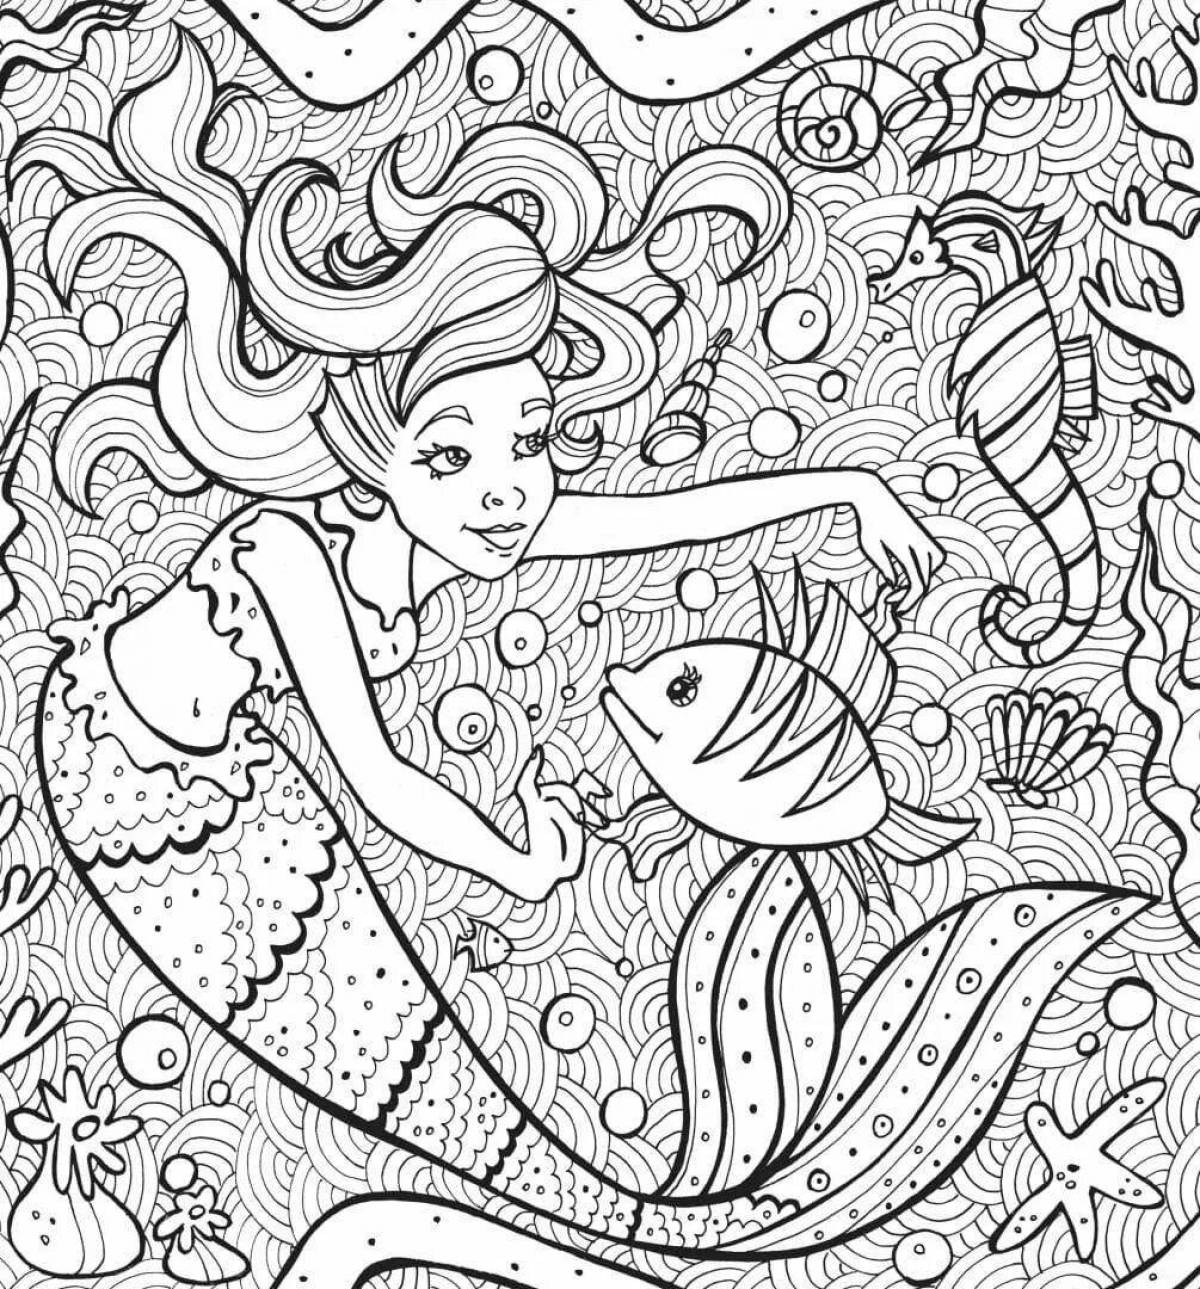 Radiant antistress coloring book for girls 9-10 years old